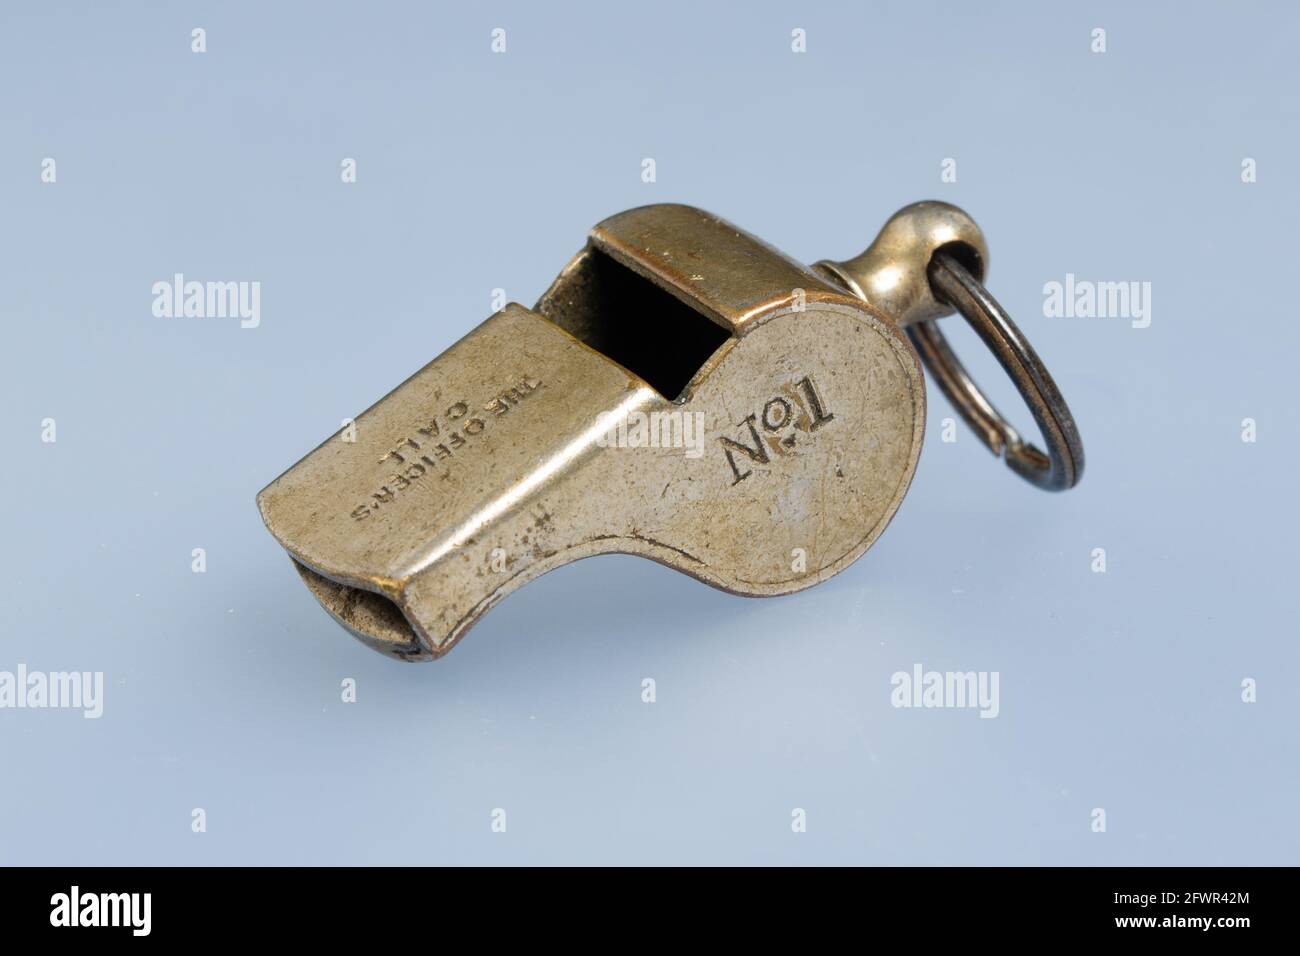 Hudson 'The Officer's Call' No. 1 whistle from about 1920. Police or military. Stock Photo